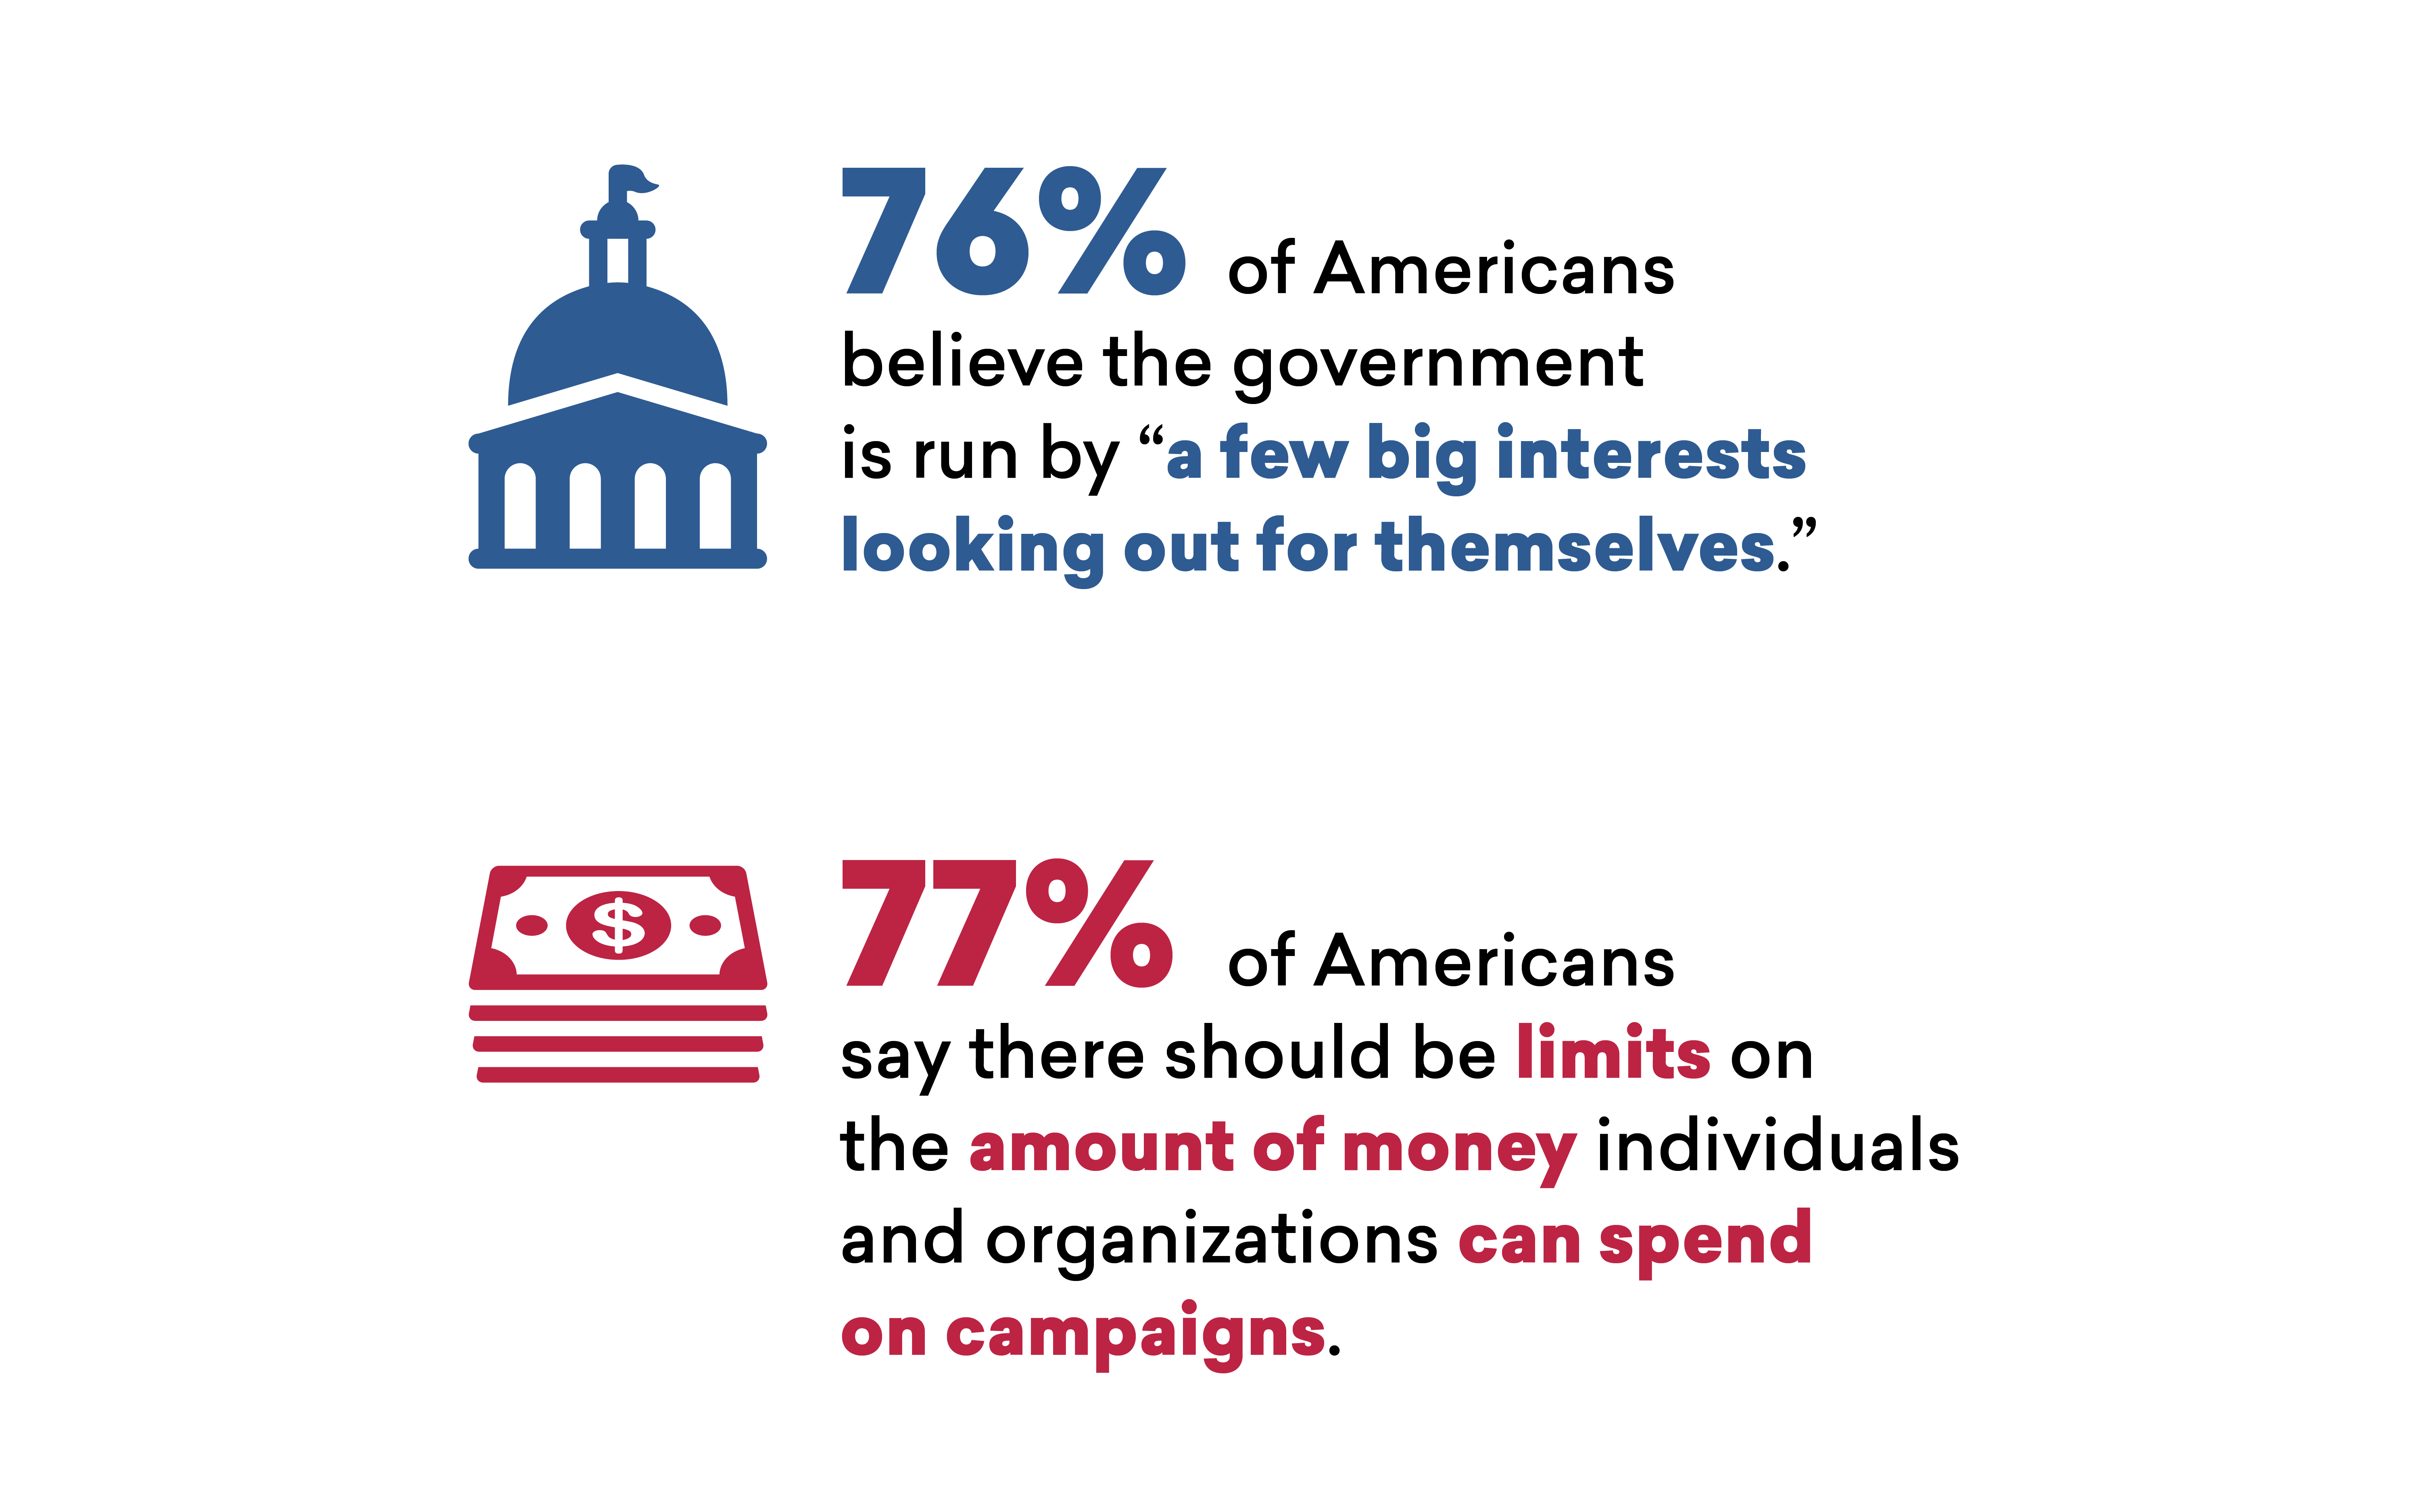 Government and Campaign Spending